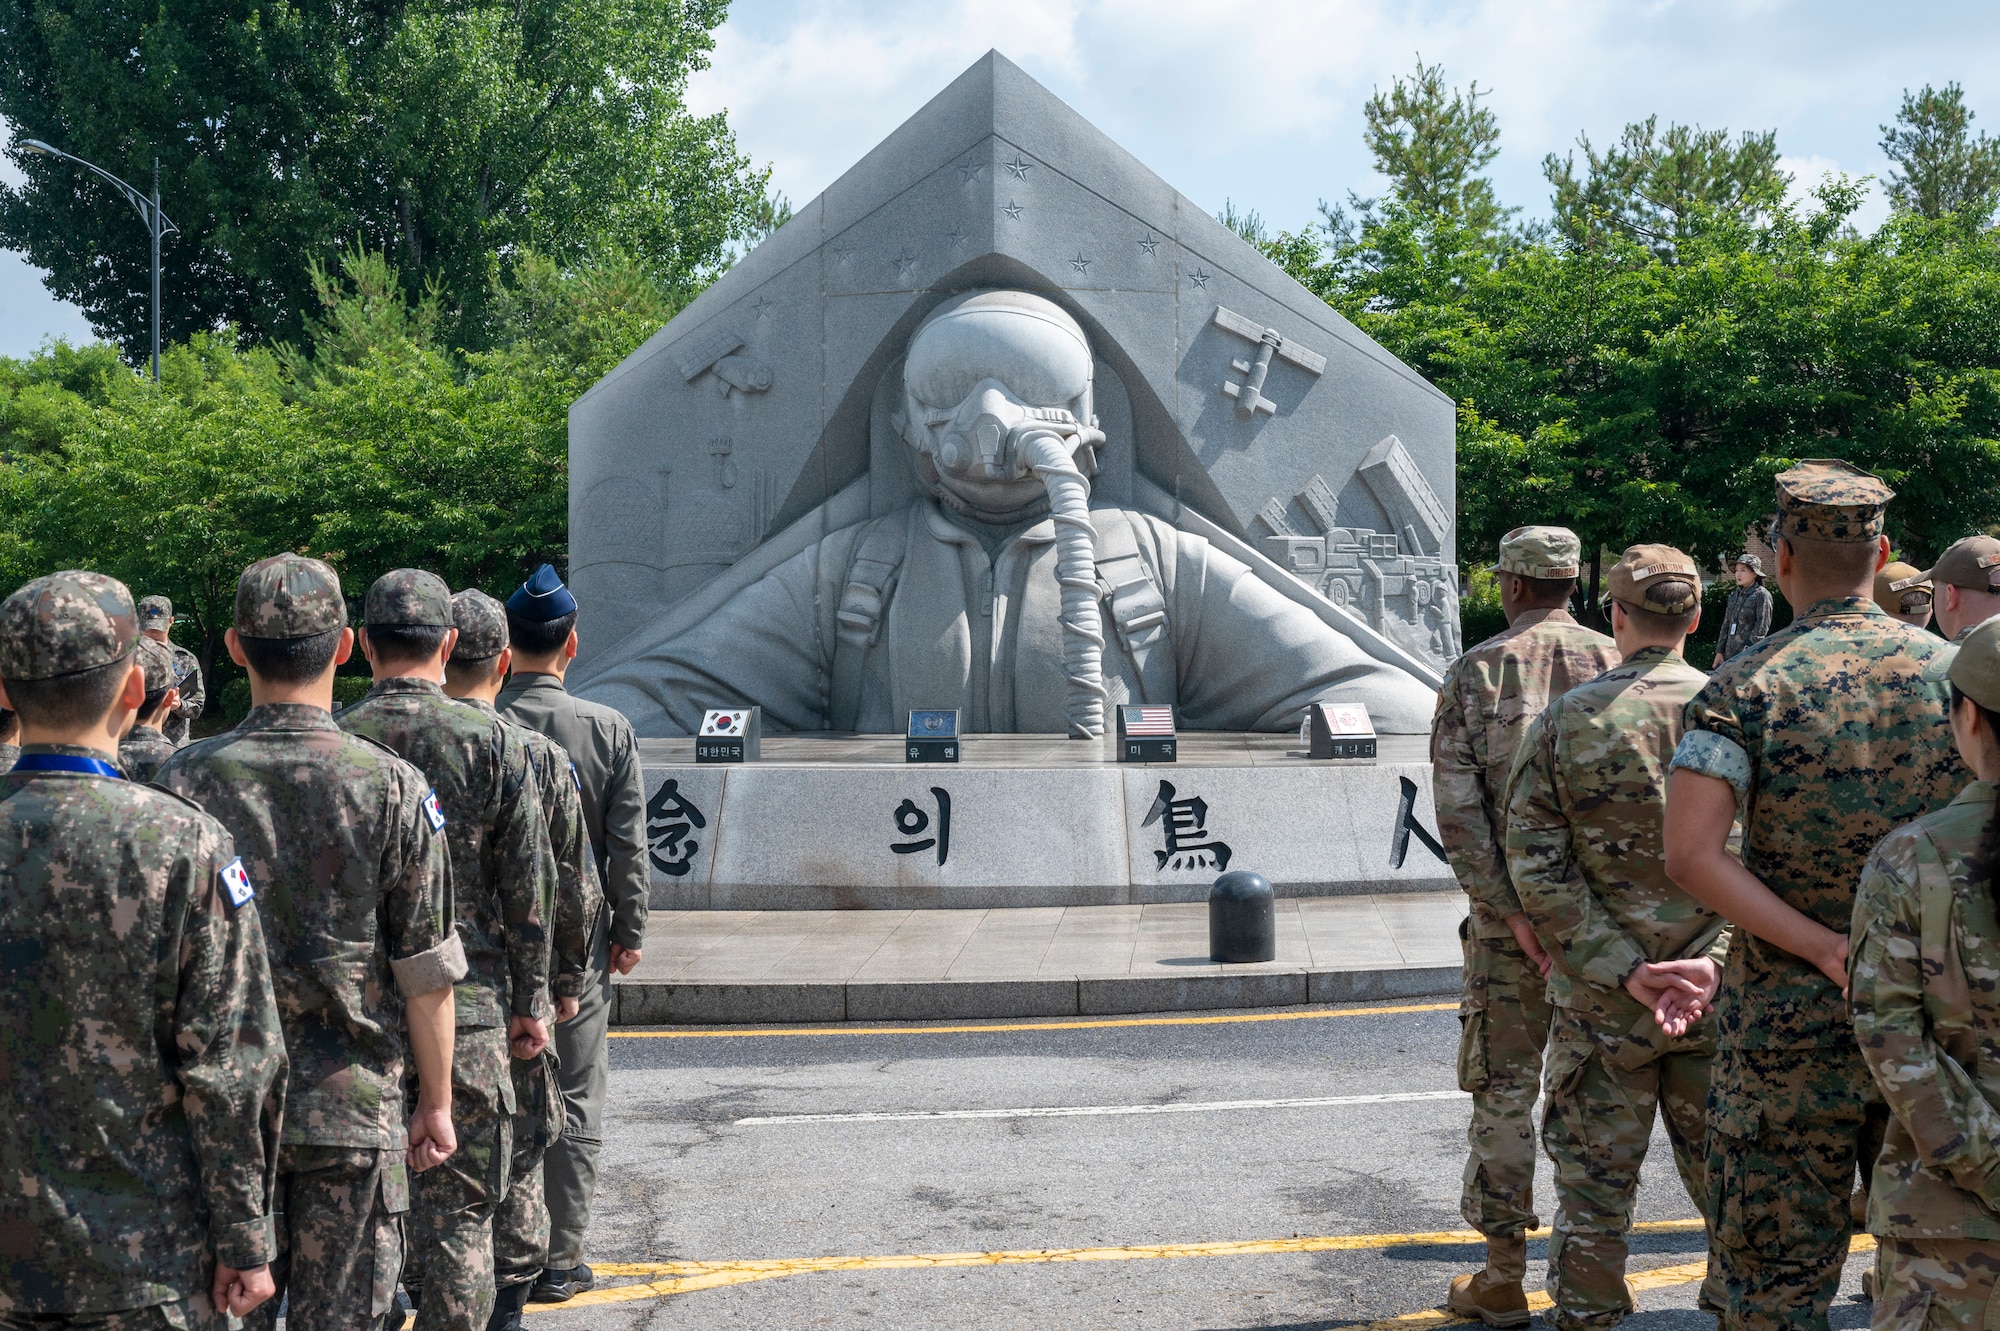 U.S. and Republic of Korea troops stand in formation during a memorial ceremony at Osan Air Base, ROK, June 22, 2023. Before the ceremony, the troops cleaned the memorial site with brushes, brooms and wipes to pay respects to those who made the ultimate sacrifice during the Korean War. (U.S. Air Force photo by Senior Airman Aaron Edwards)